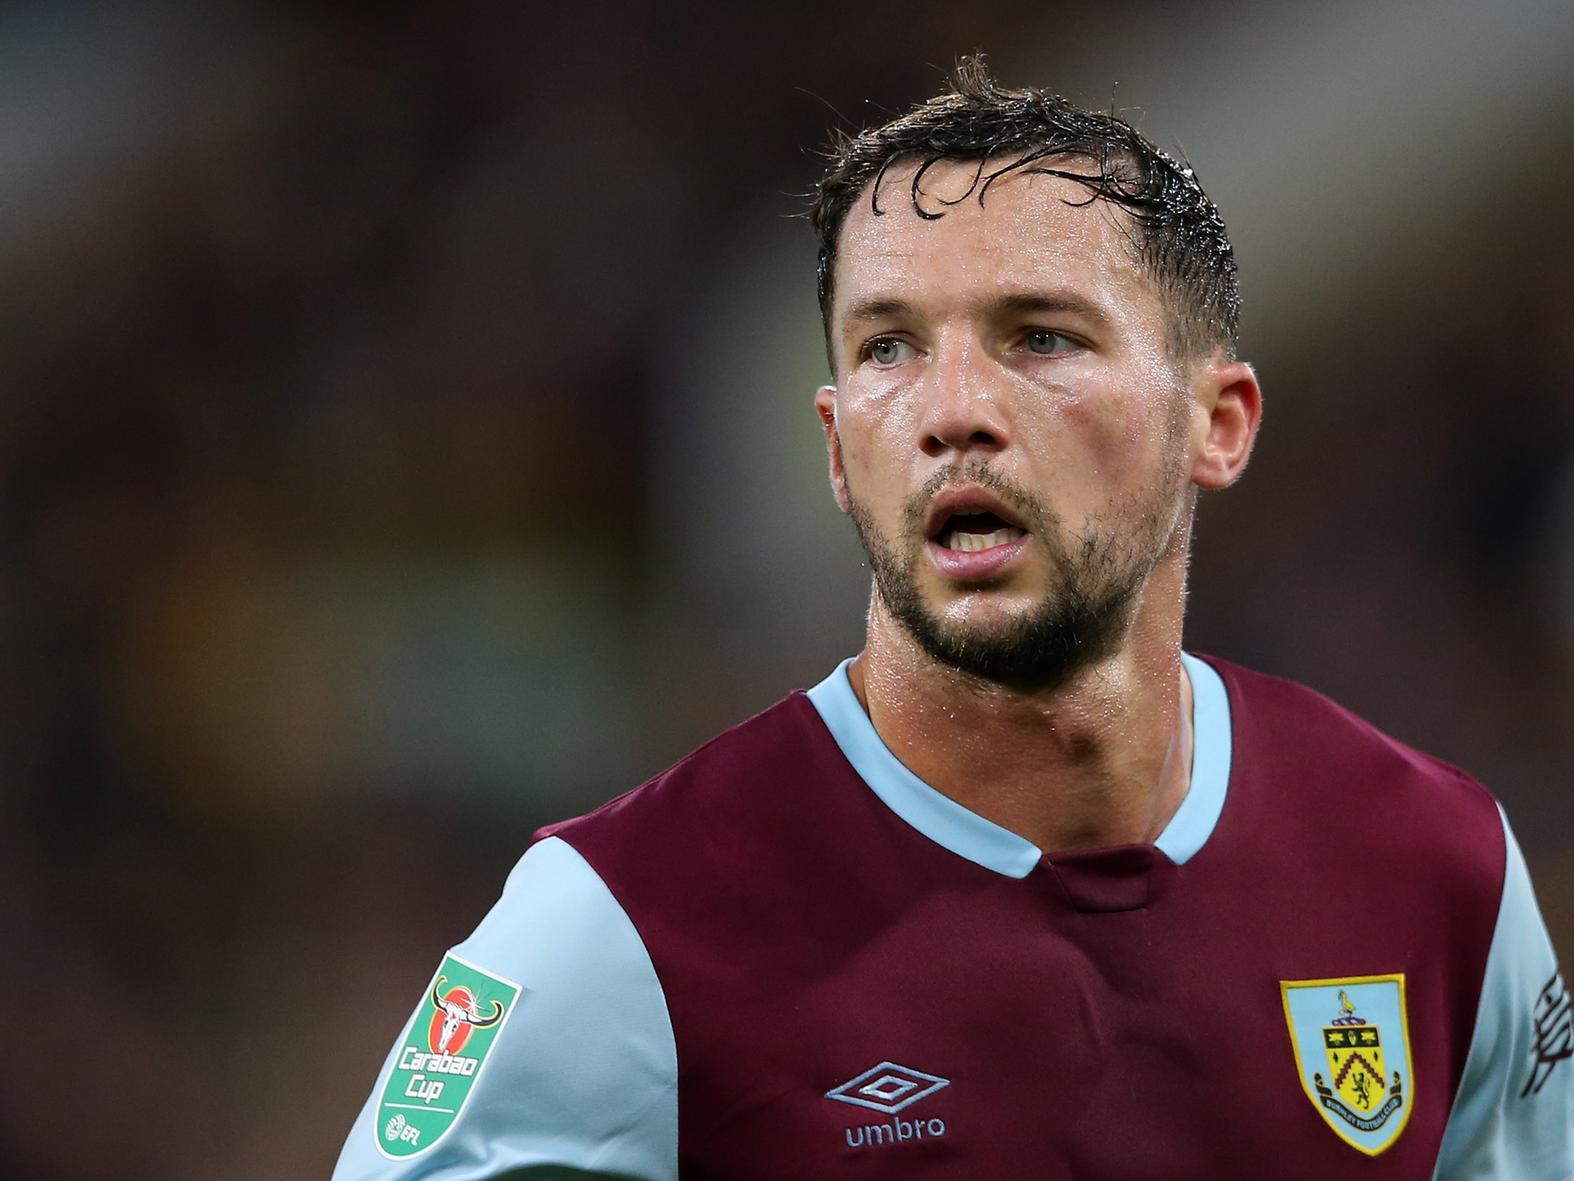 Chelsea want any club wanting to take English midfielder Danny Drinkwater on loan to pay the 29-year-old's 110,000-a-week wages. (Sun)